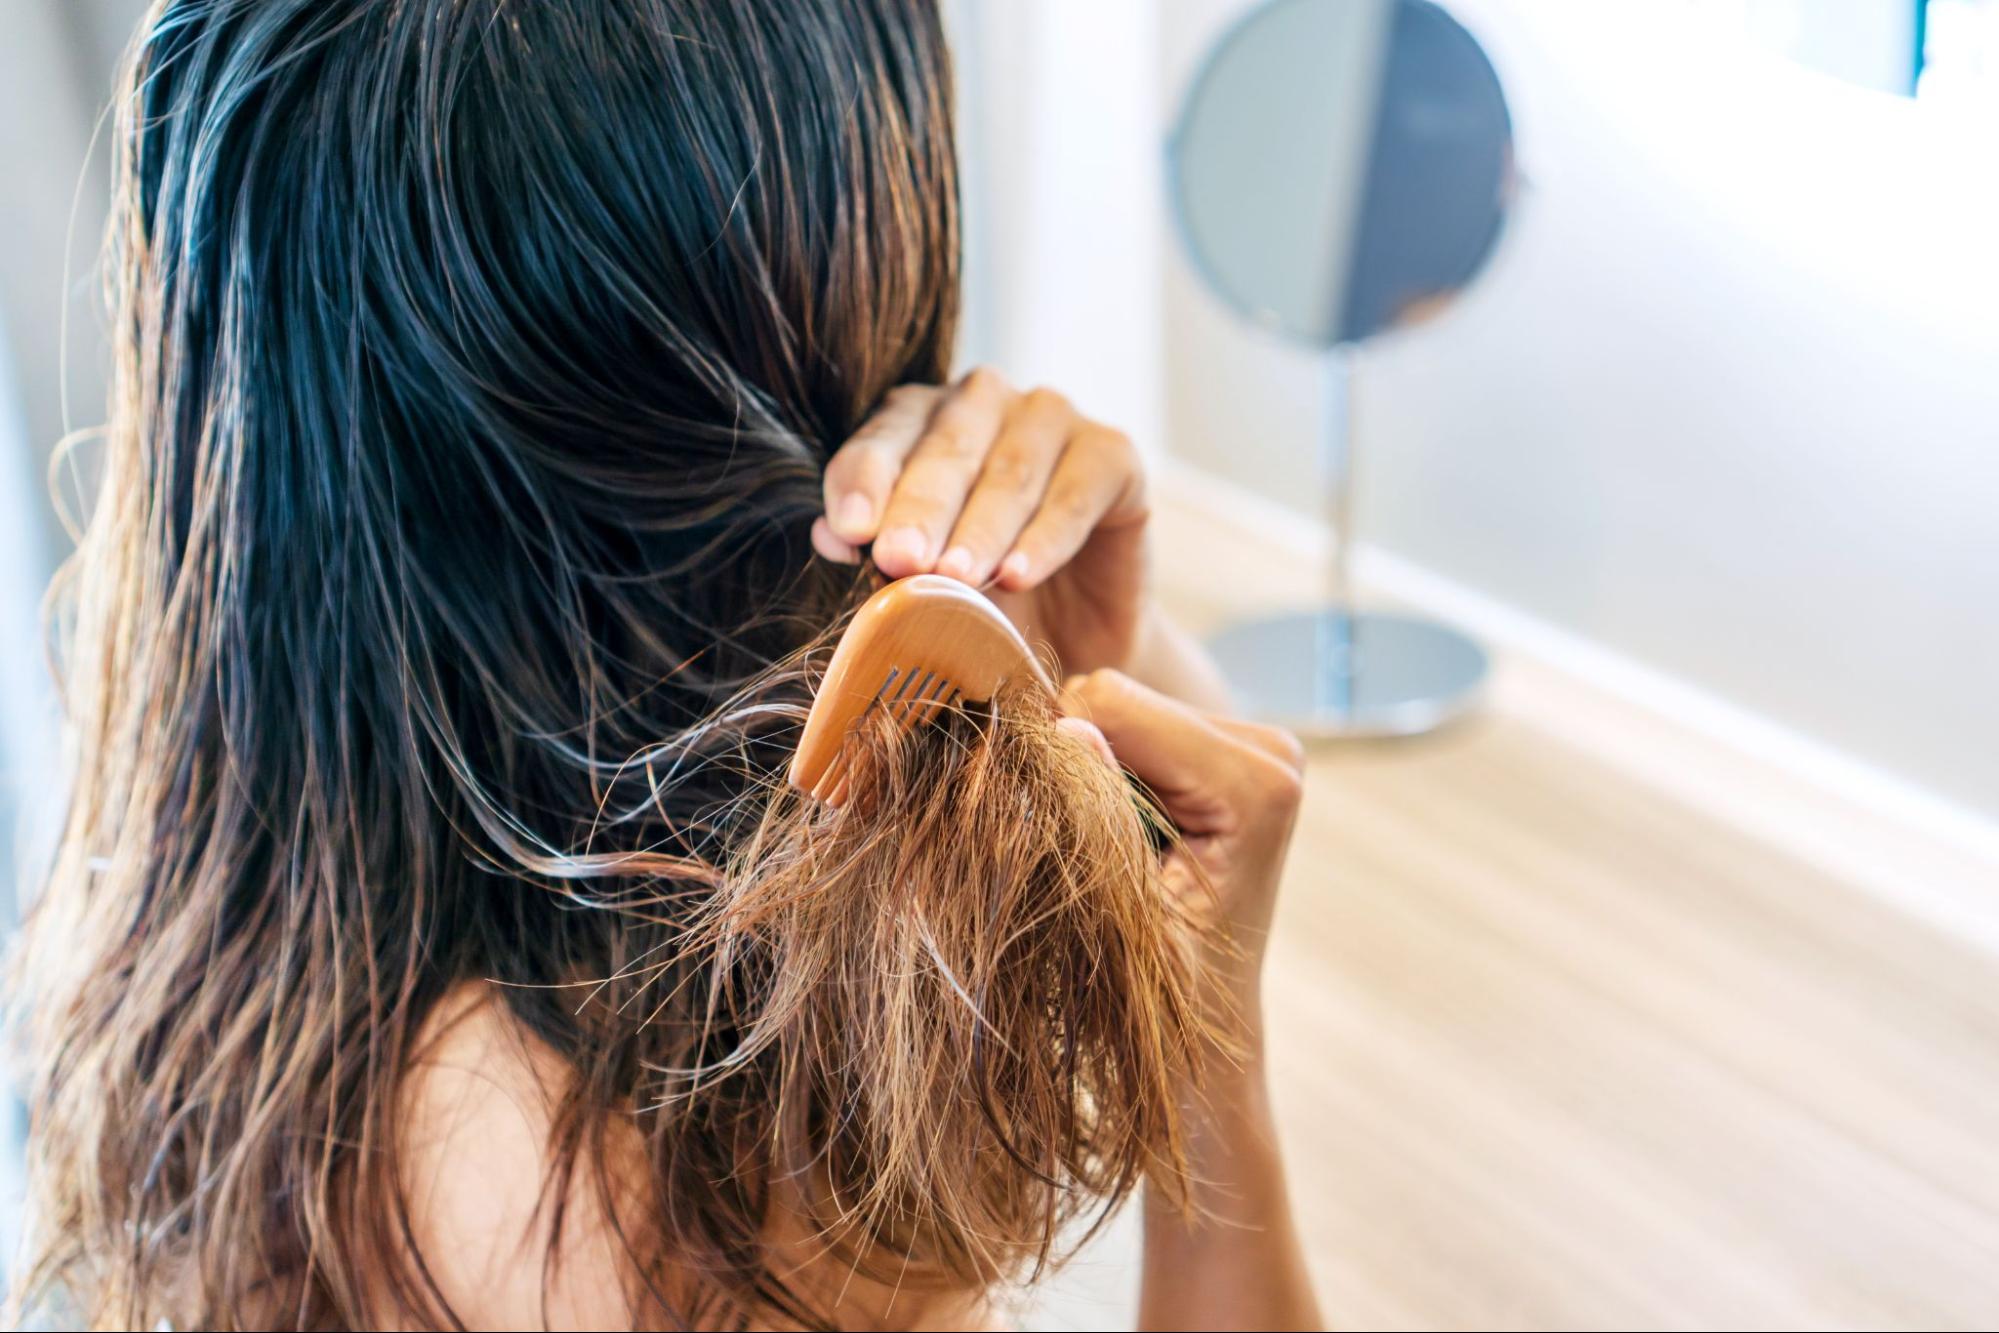 How to wash your hair properly, not to damage your hair